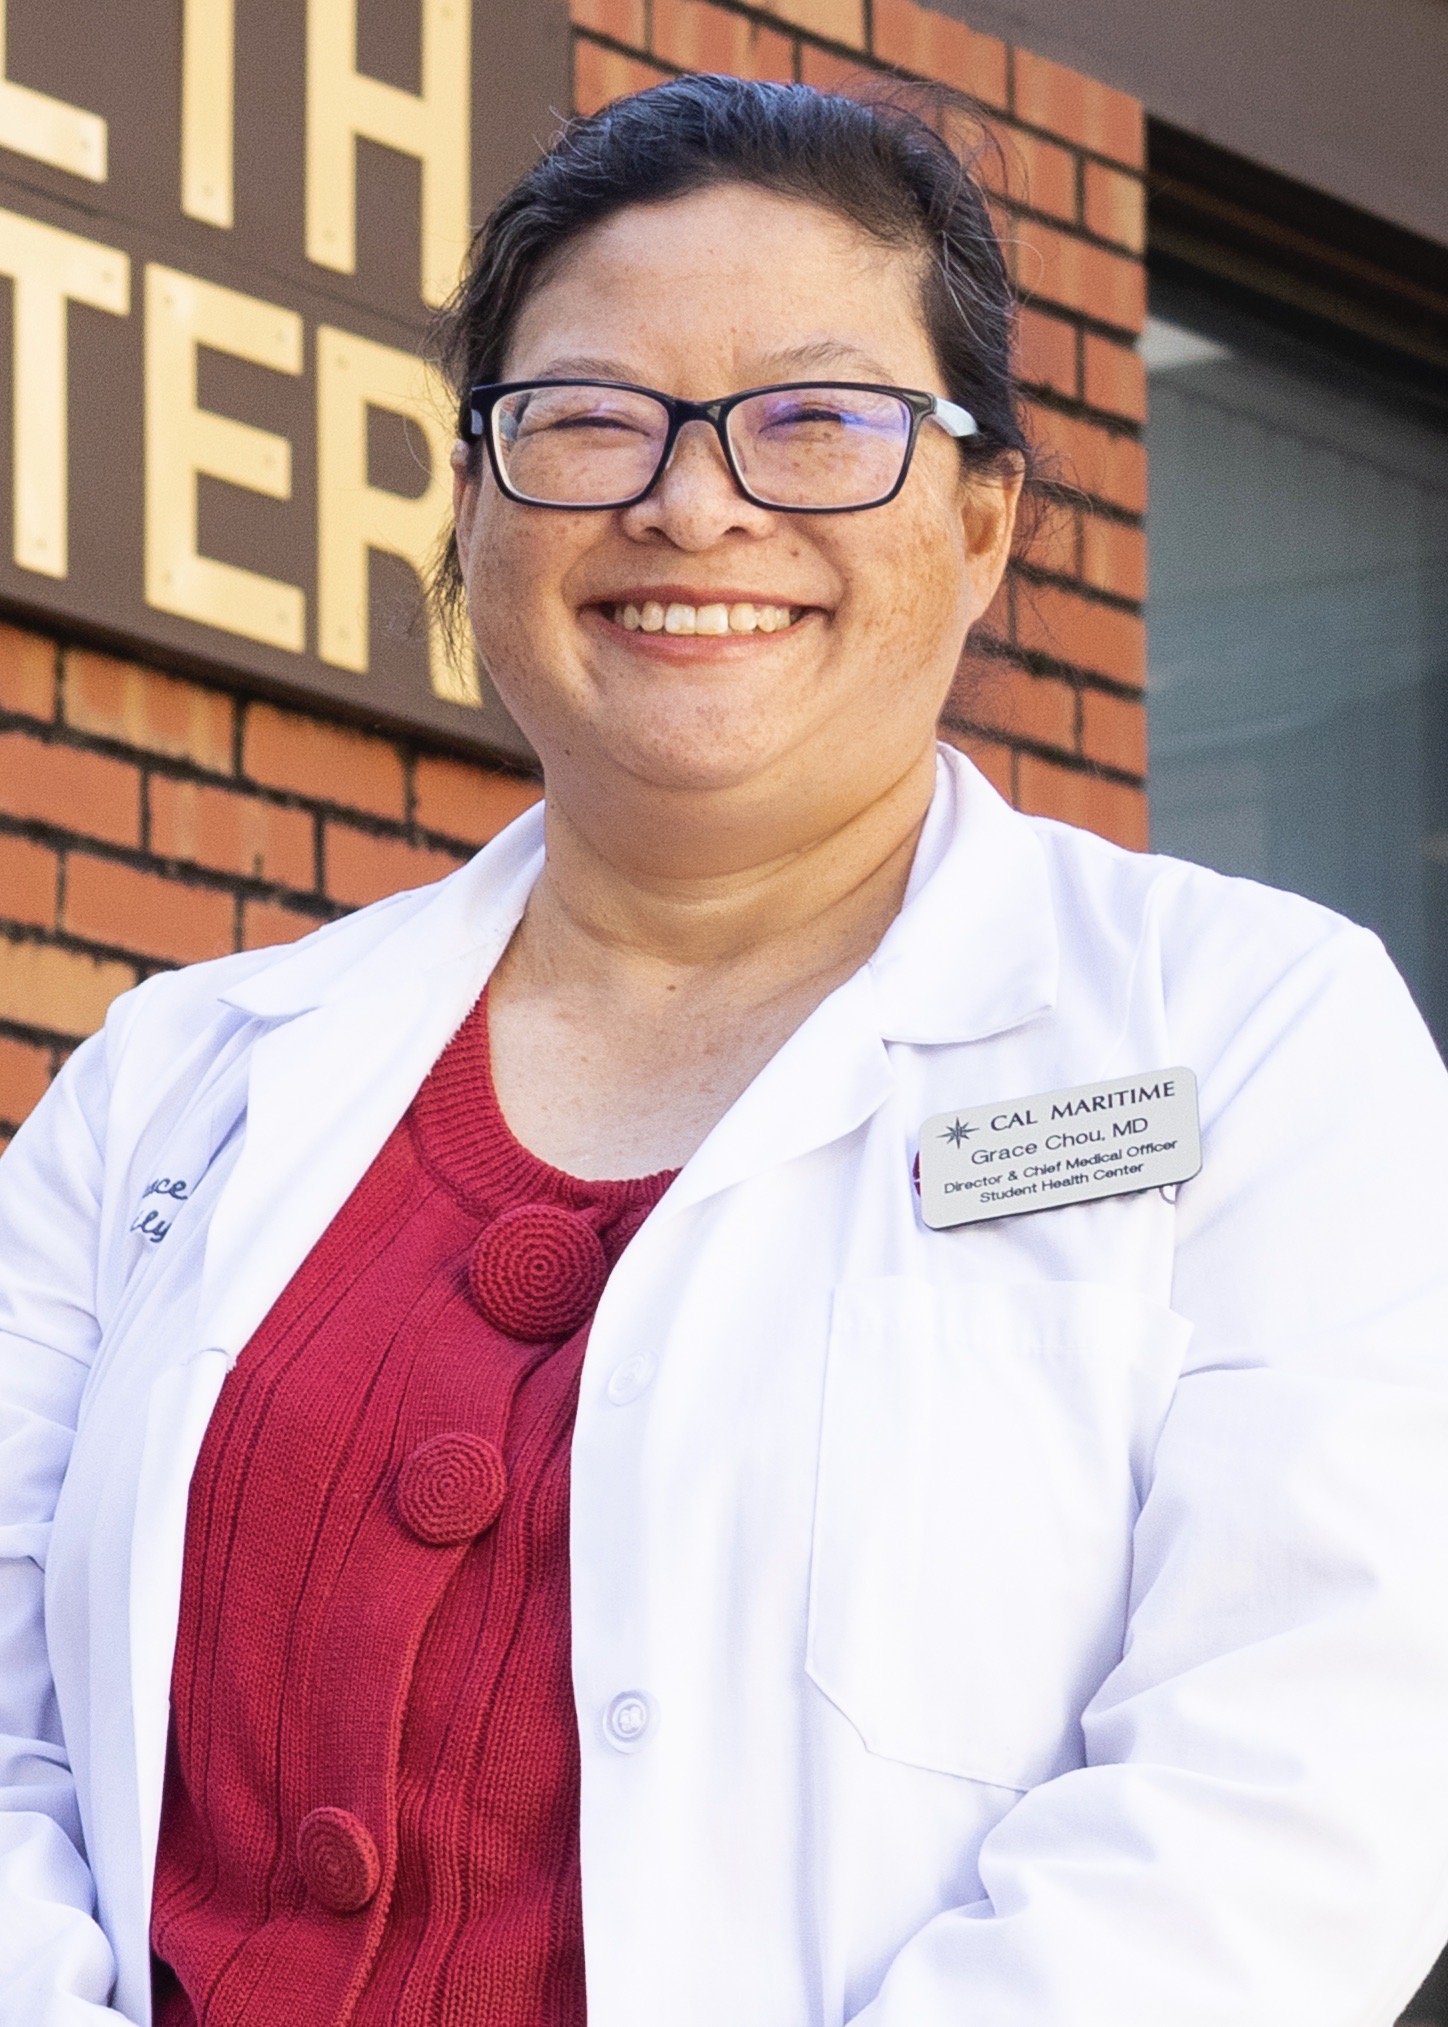 Dr. Grace Chou, Student Health Director